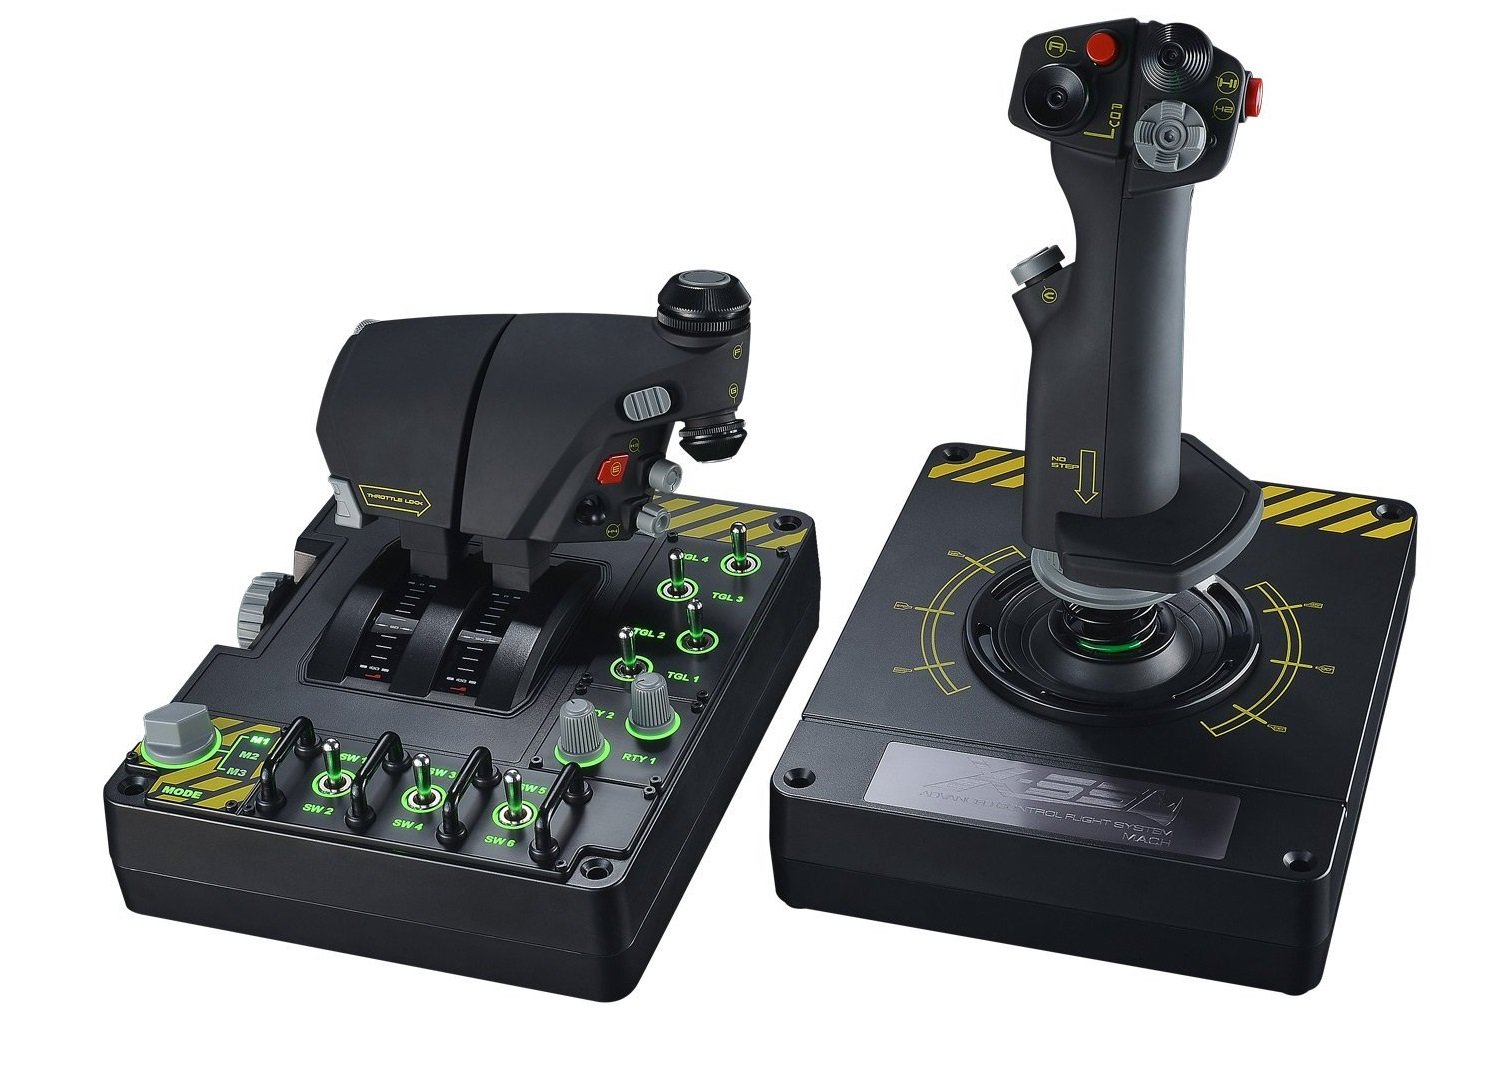 8 best PC joysticks for truly awesome gaming sessions [2019]